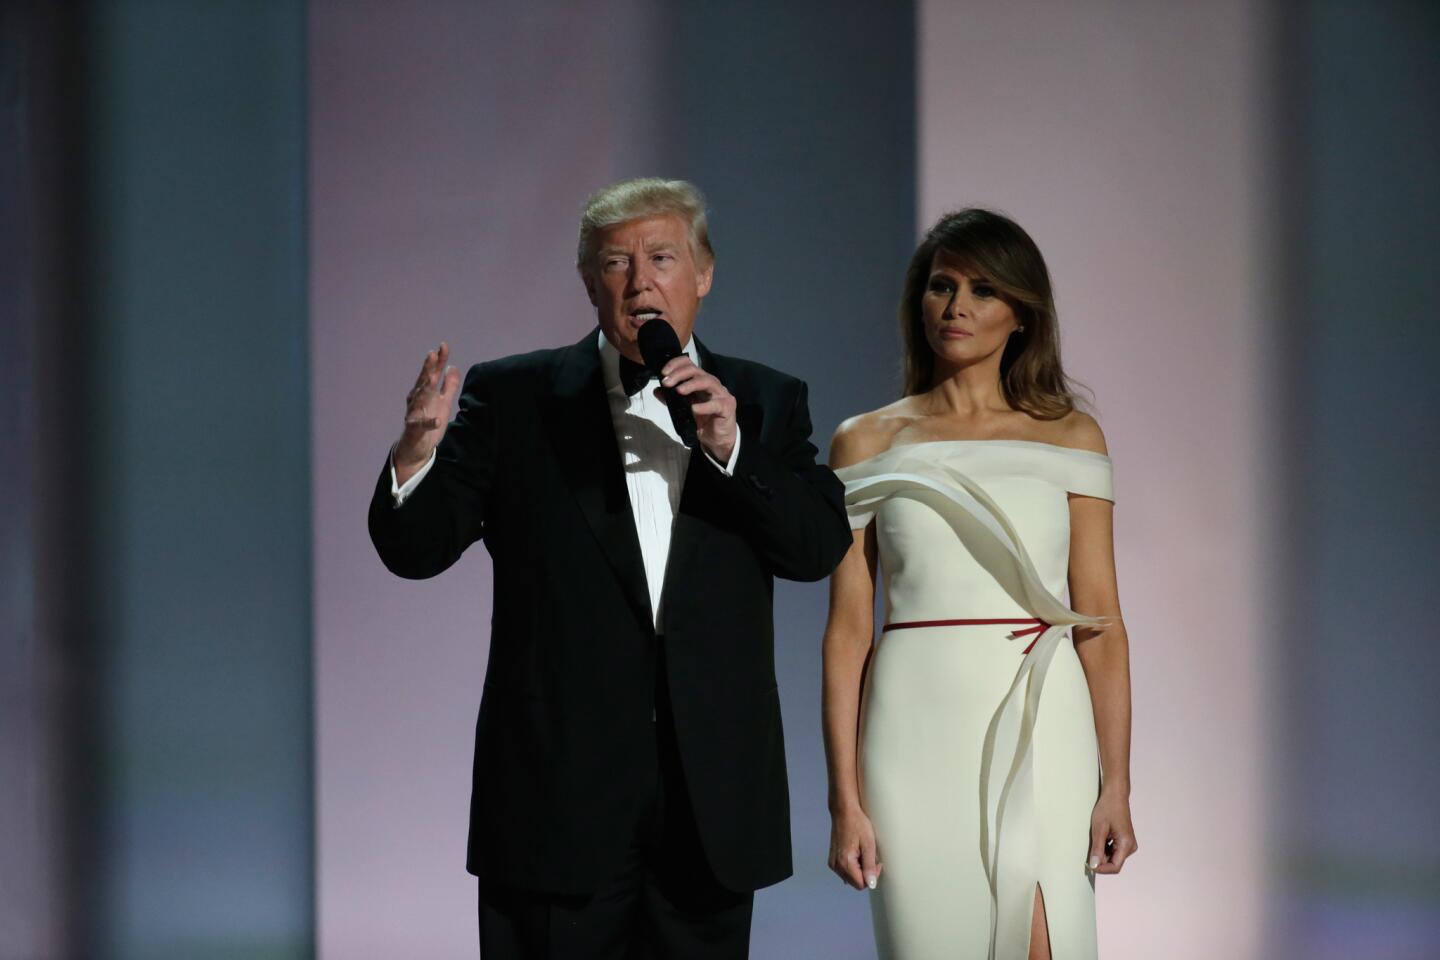 President Donald Trump and First Lady Melania Trump attend the Liberty Inaugural Ball, the first of three inaugural balls they planned to attend.